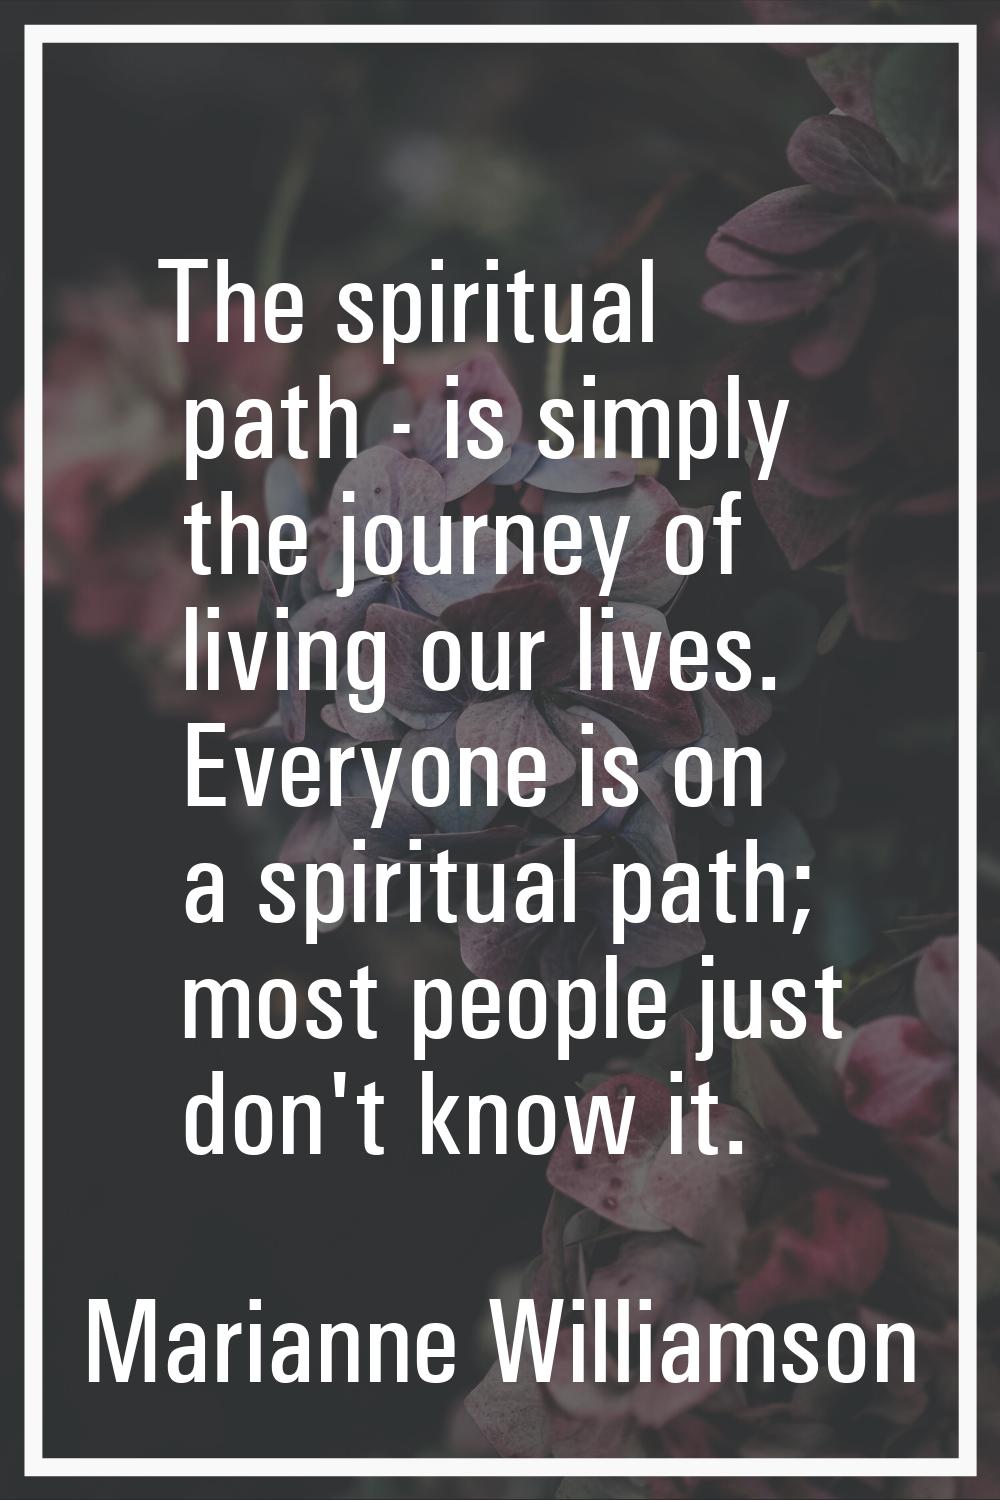 The spiritual path - is simply the journey of living our lives. Everyone is on a spiritual path; mo